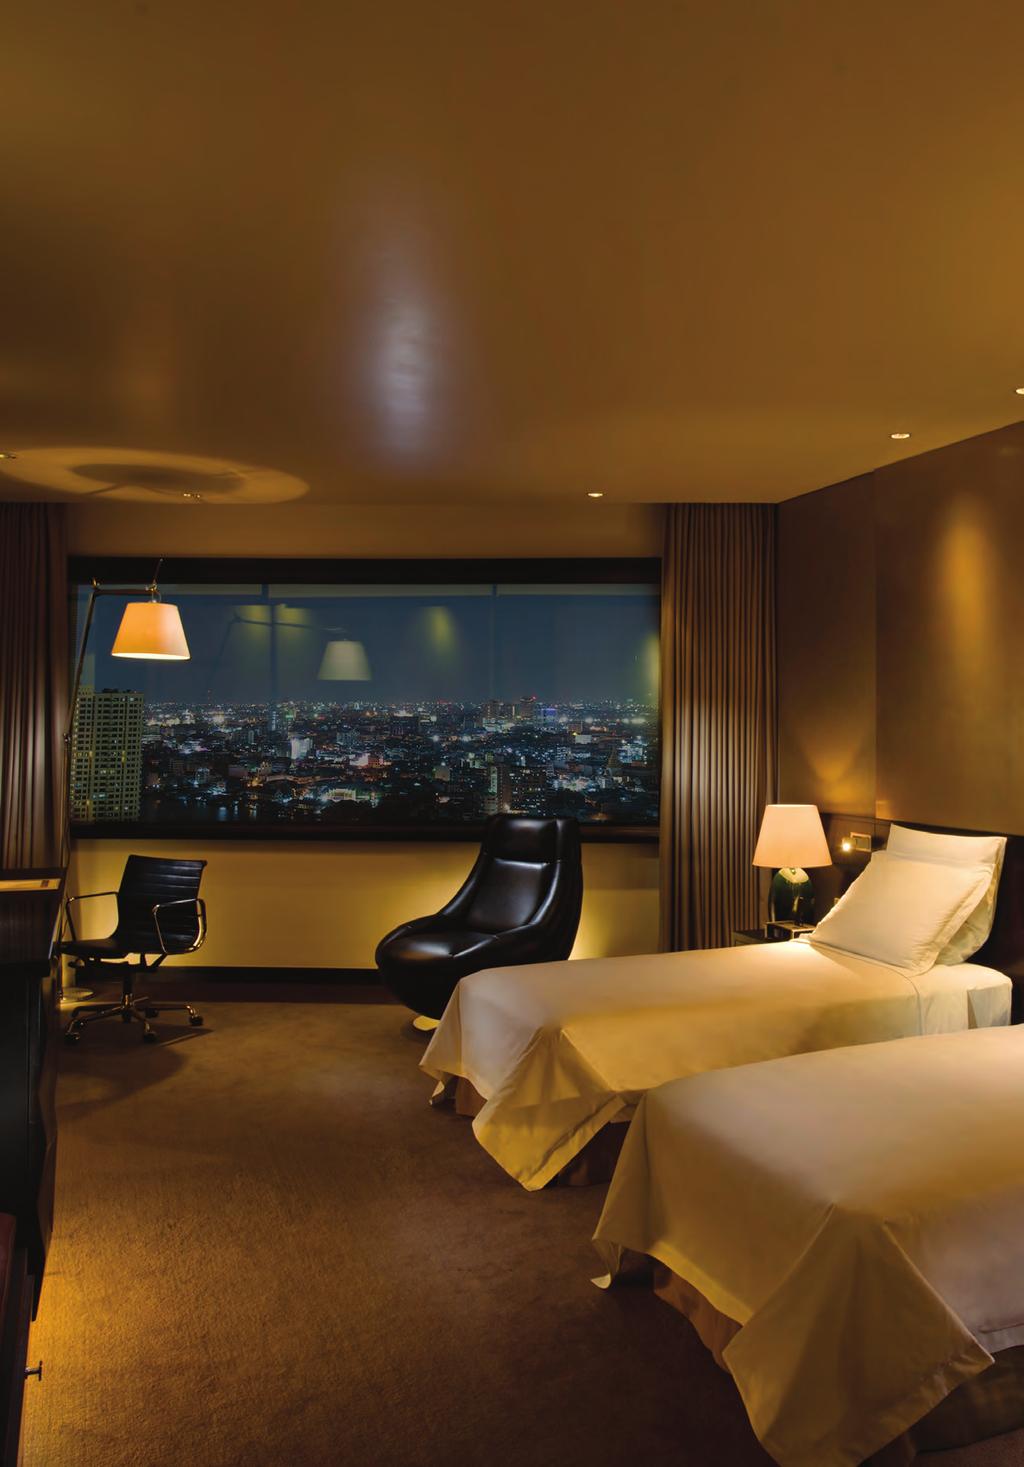 OUR ROOMS Millennium Hilton Bangkok offers 543 guest rooms and suites wrapped in 32 elegant, curving storeys.